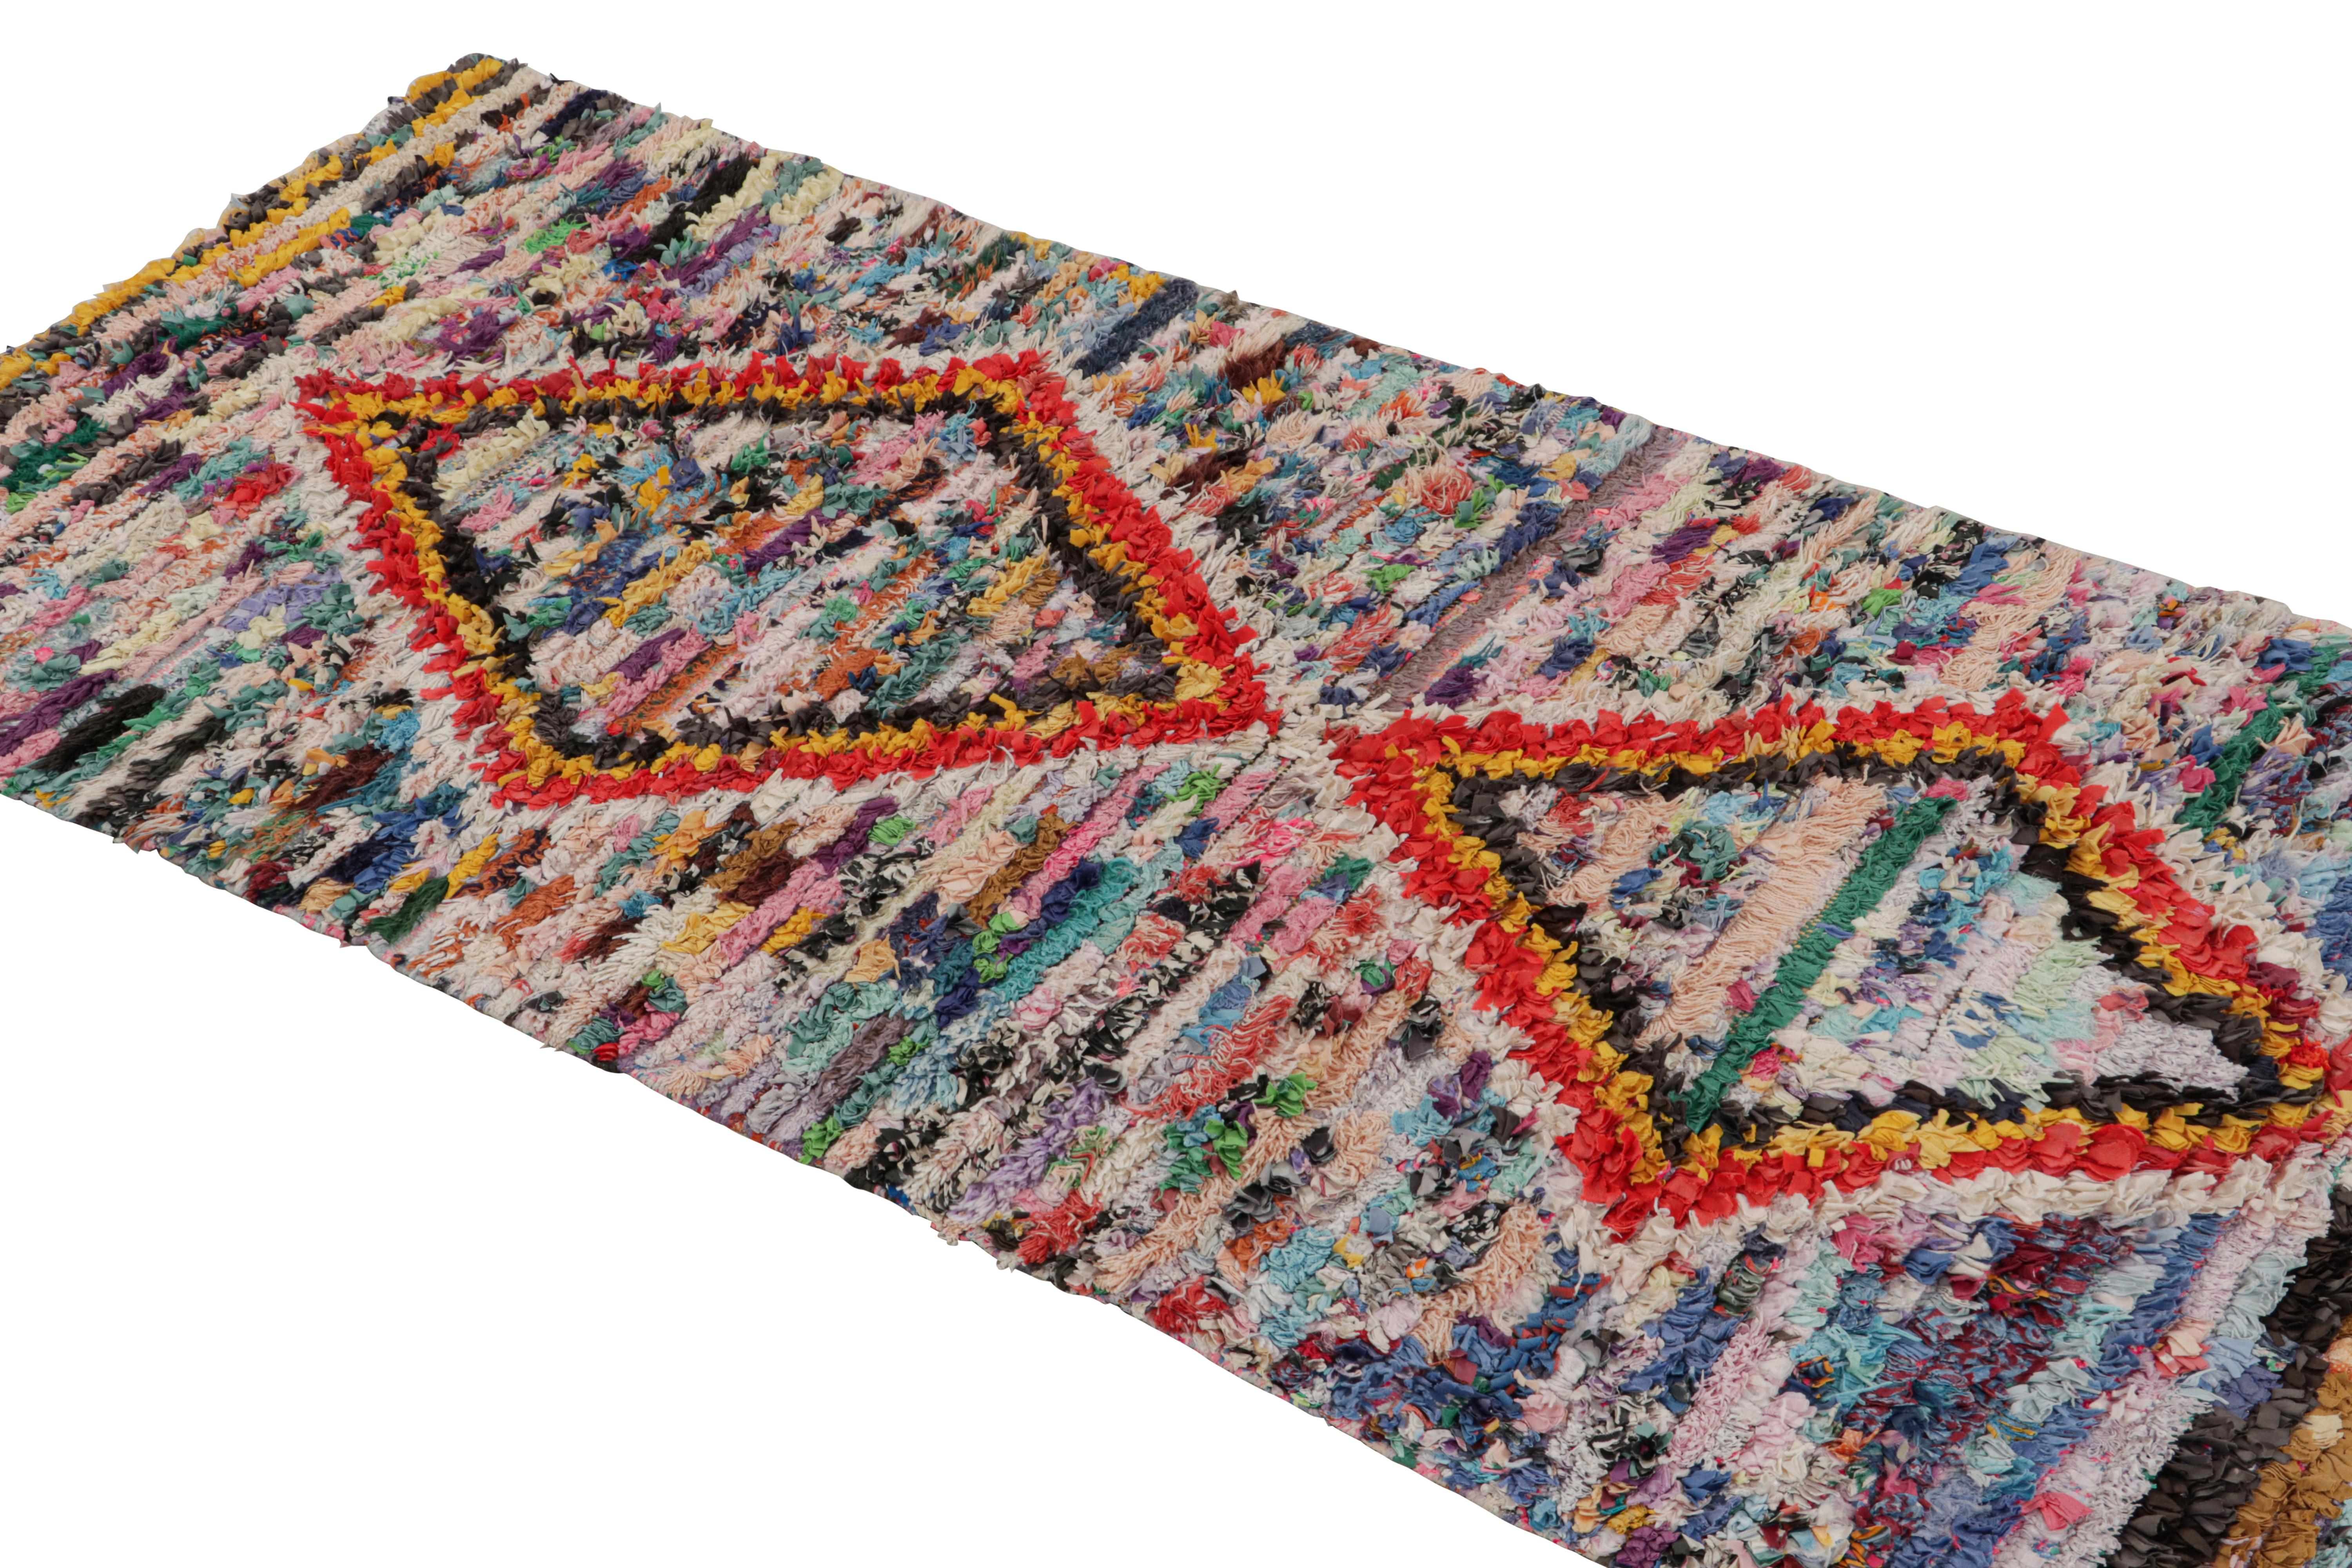 Hand-knotted in wool circa 1950-1960, this vintage 3x6 Moroccan runner rug is believed to hail from the Azilal tribe. 

On the Design: 

This runner enjoys red, gold and black diamond patterns on a polychromatic background. Keen eyes will further